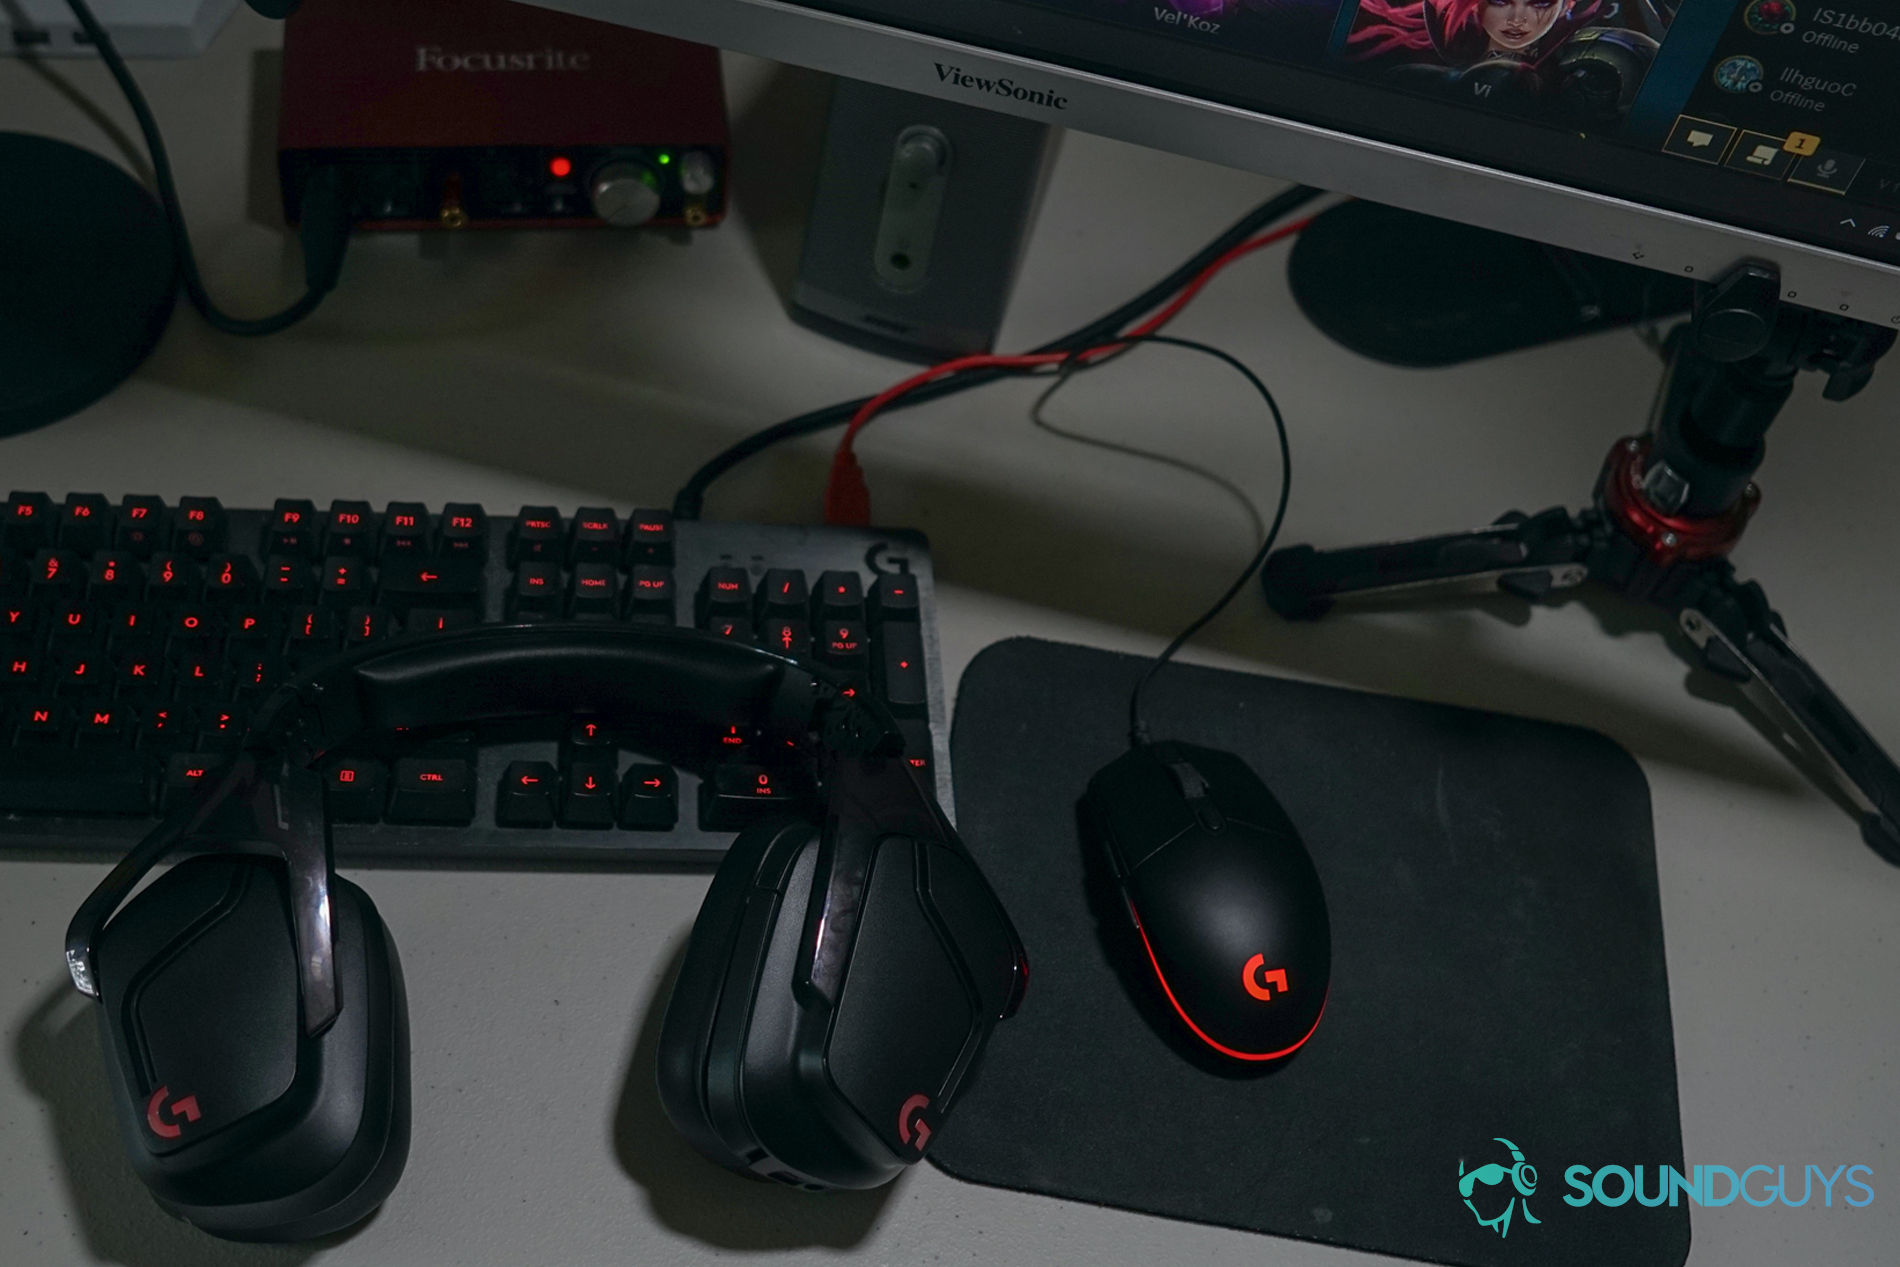 The Logitech G935 gaming headset sits in front of a PC, next to a Logitech gaming mouse and Logitech G413 Carbon mechanical keyboard, with a Viewsonic monitor and Focusrite Scarlet 2i2 audio interface in the background.